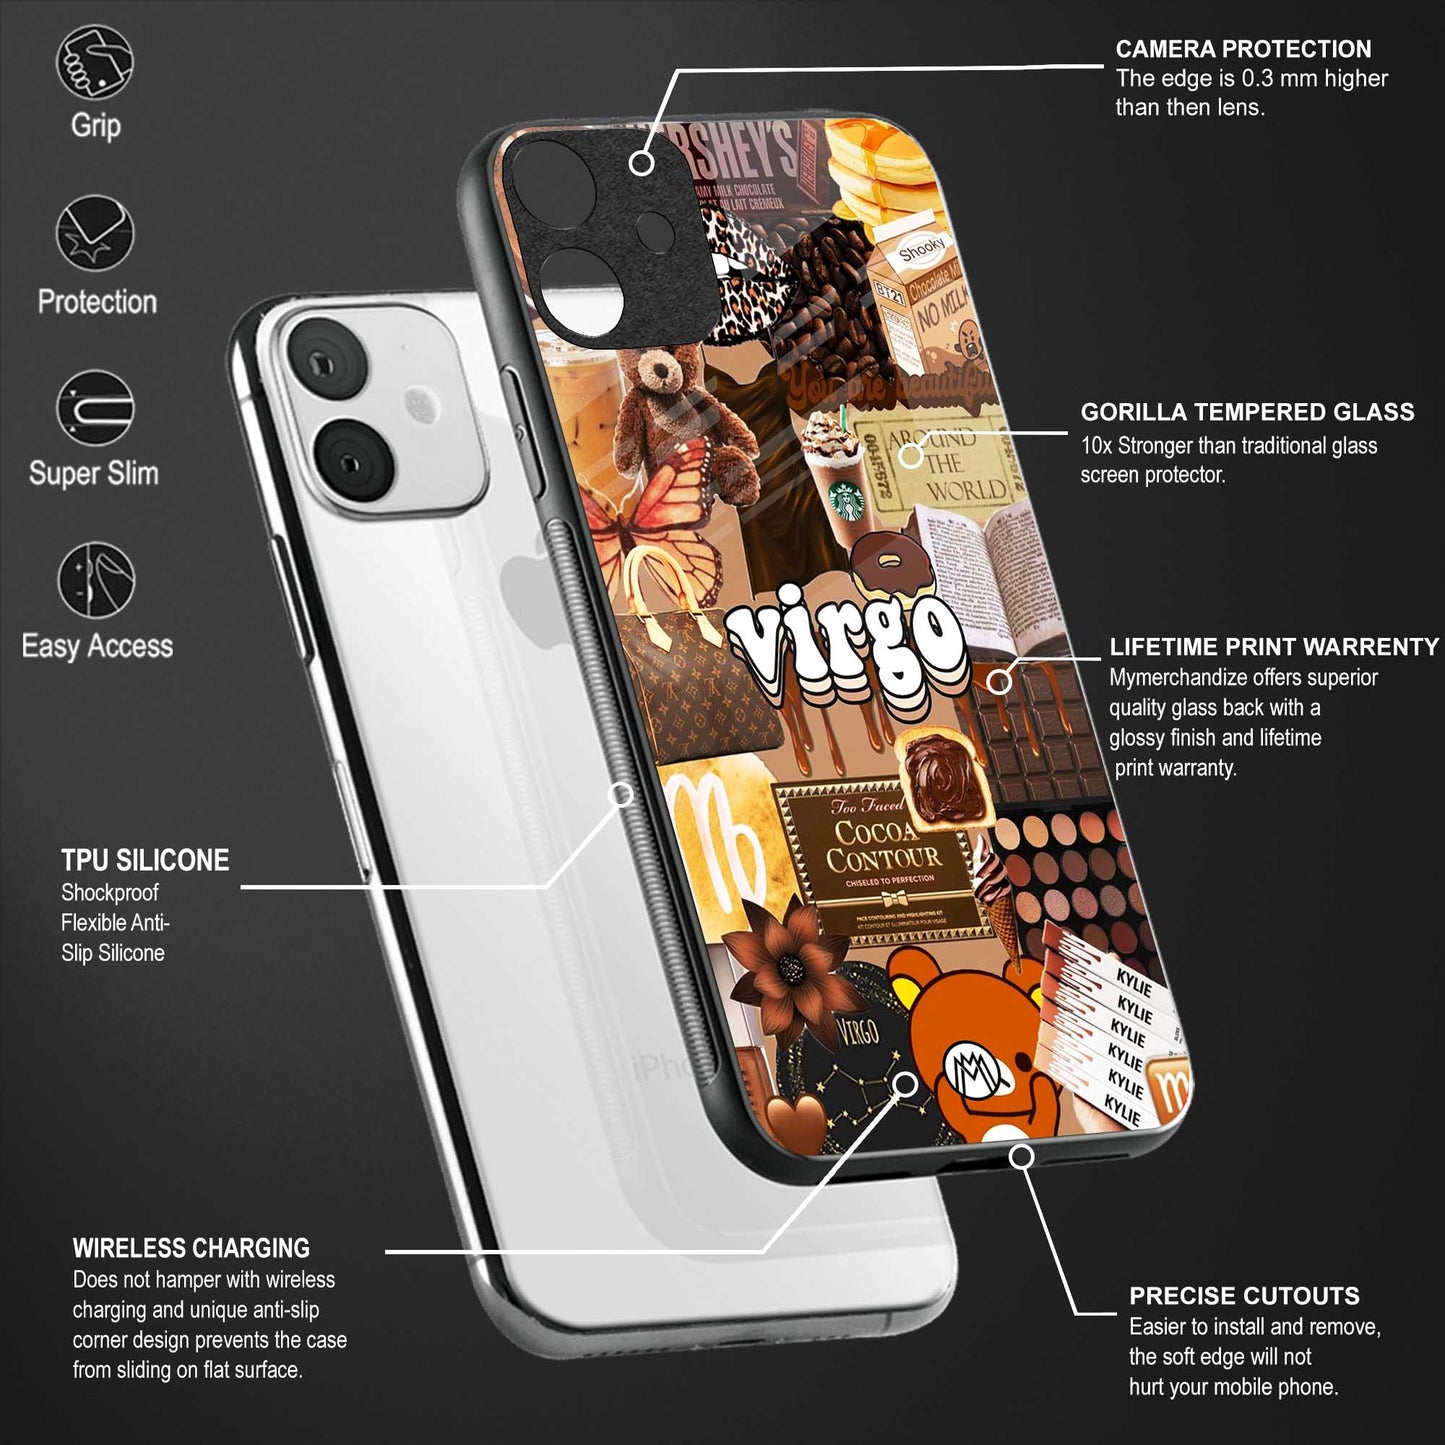 virgo aesthetic collage back phone cover | glass case for vivo y16